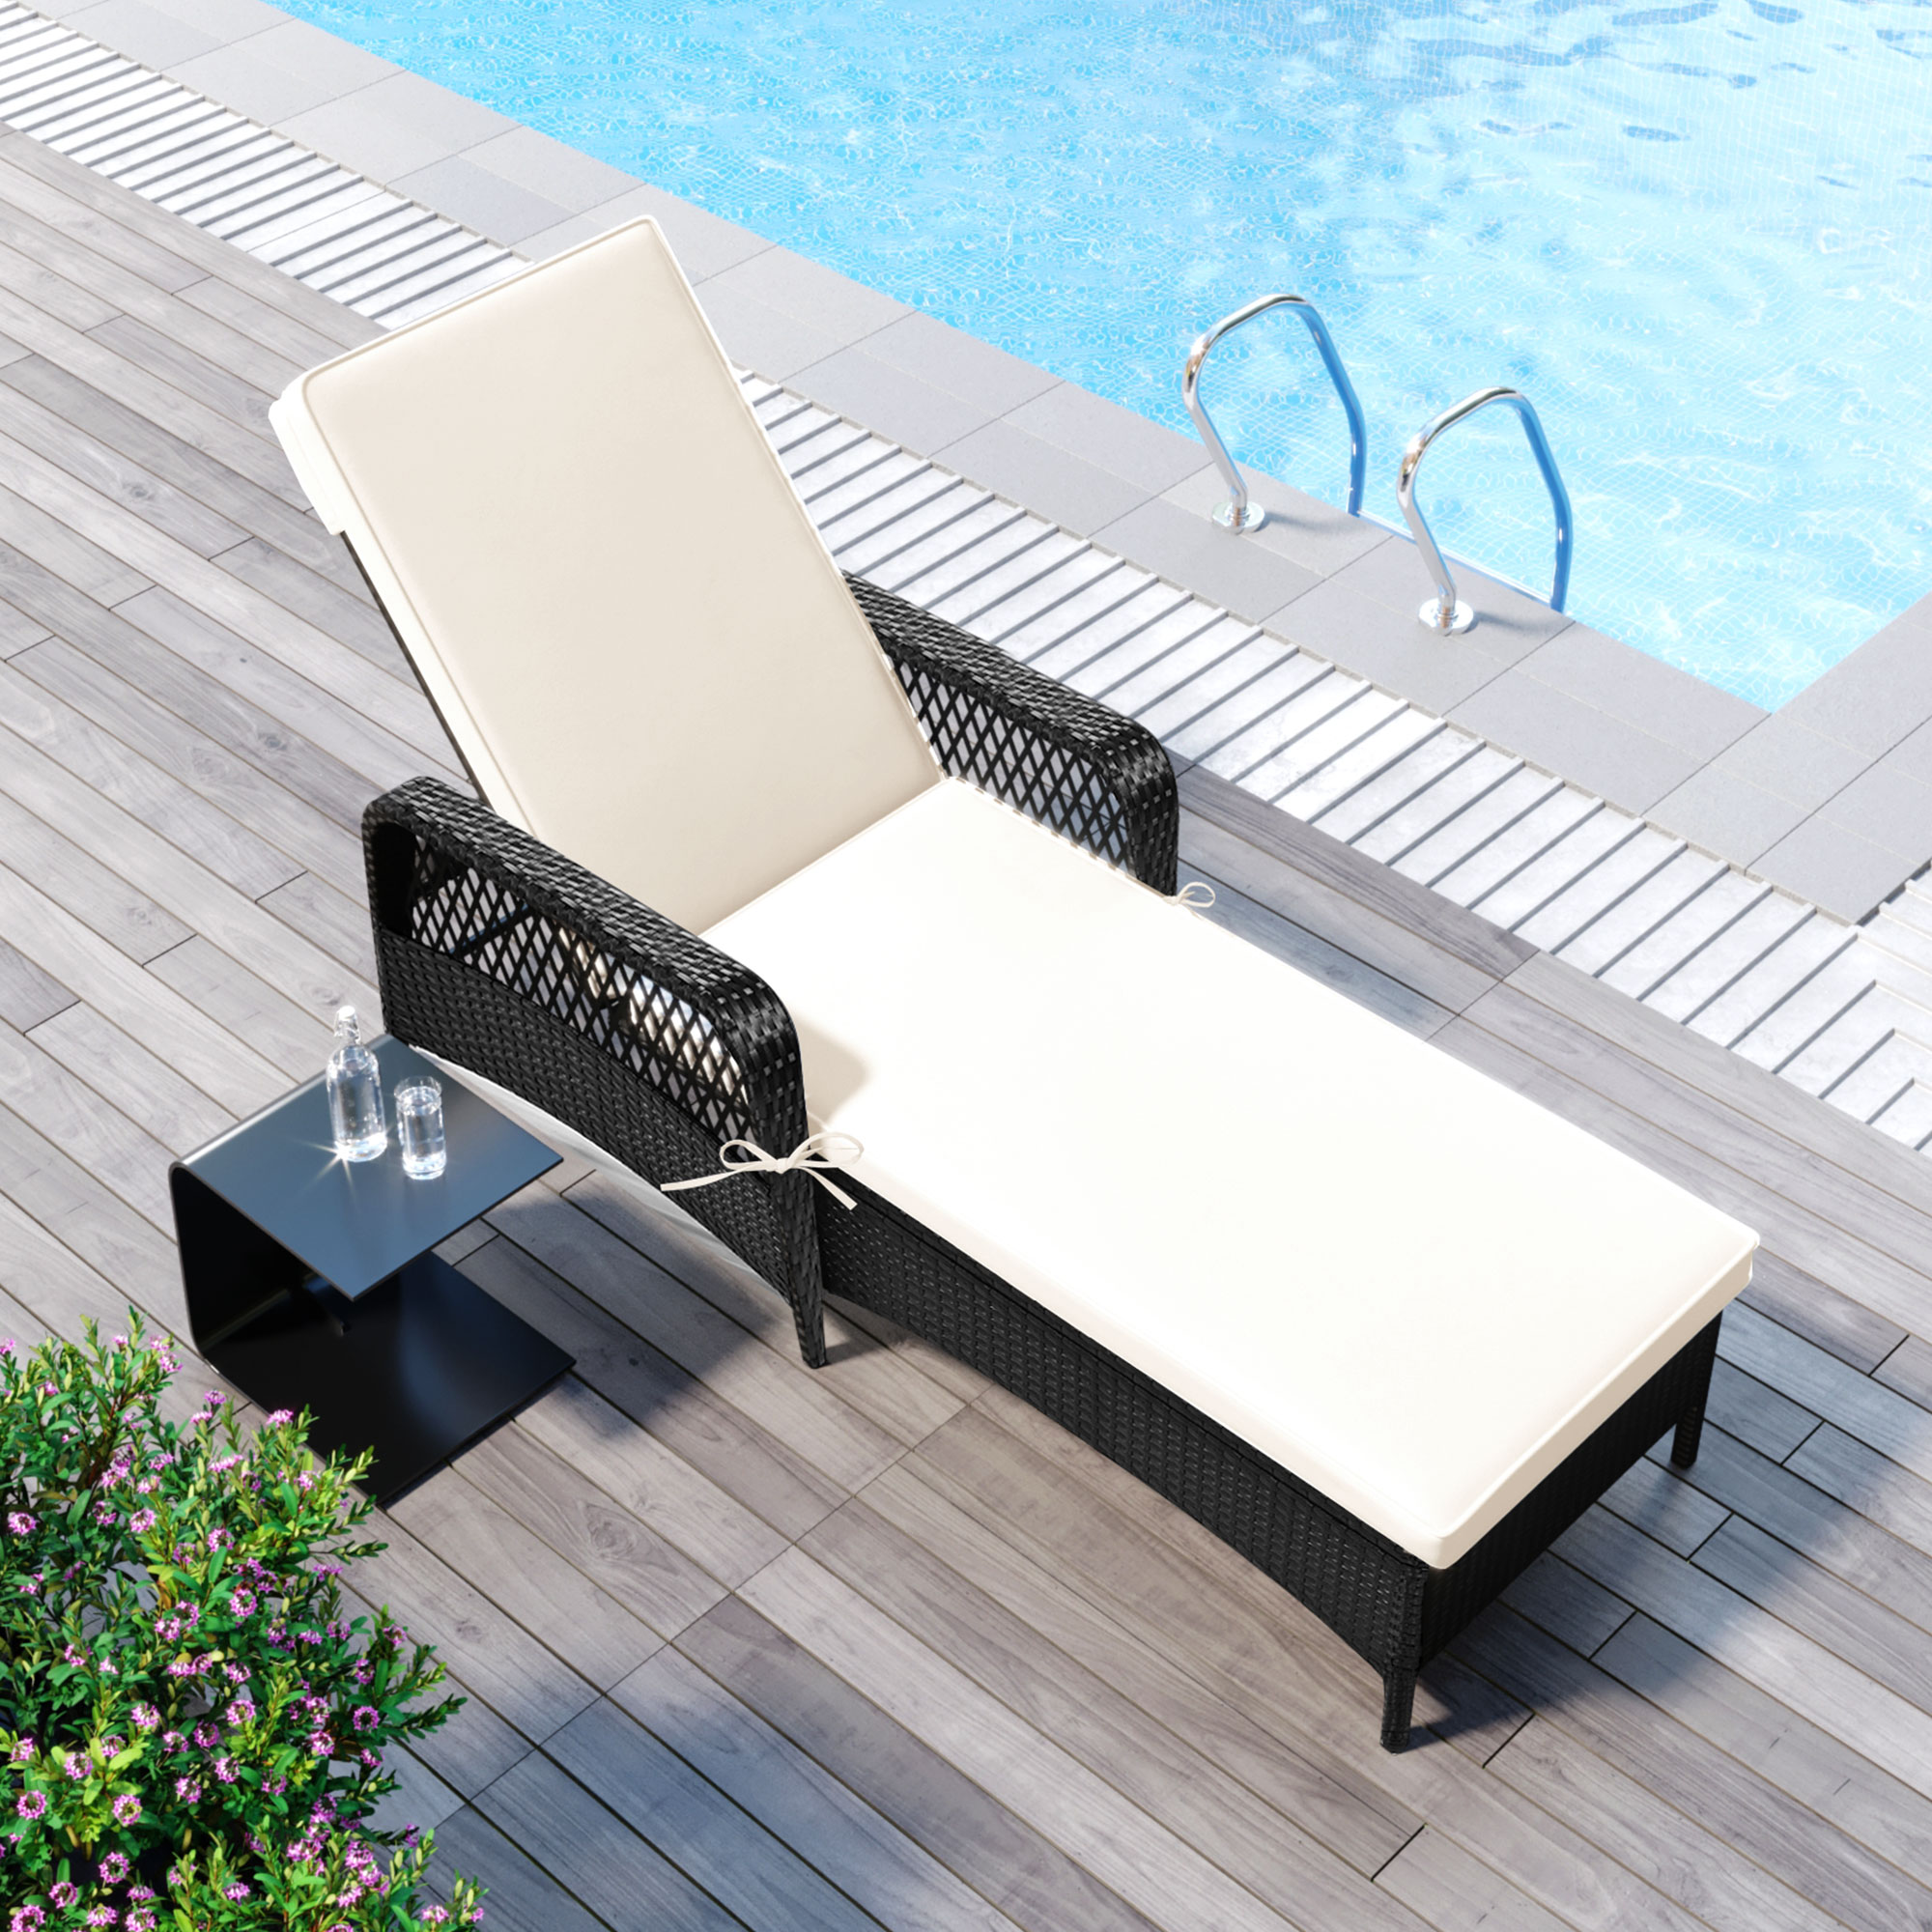 Patio Chaise Lounge Chair, Rattan Wicker Chaise Lounge, All-Weather Sun Chaise Lounge Furniture, Pool Furniture Sunbed with Removable Cushion, Tanning Lounge Chair with 6 Adjustable Positions, B332 - image 1 of 9